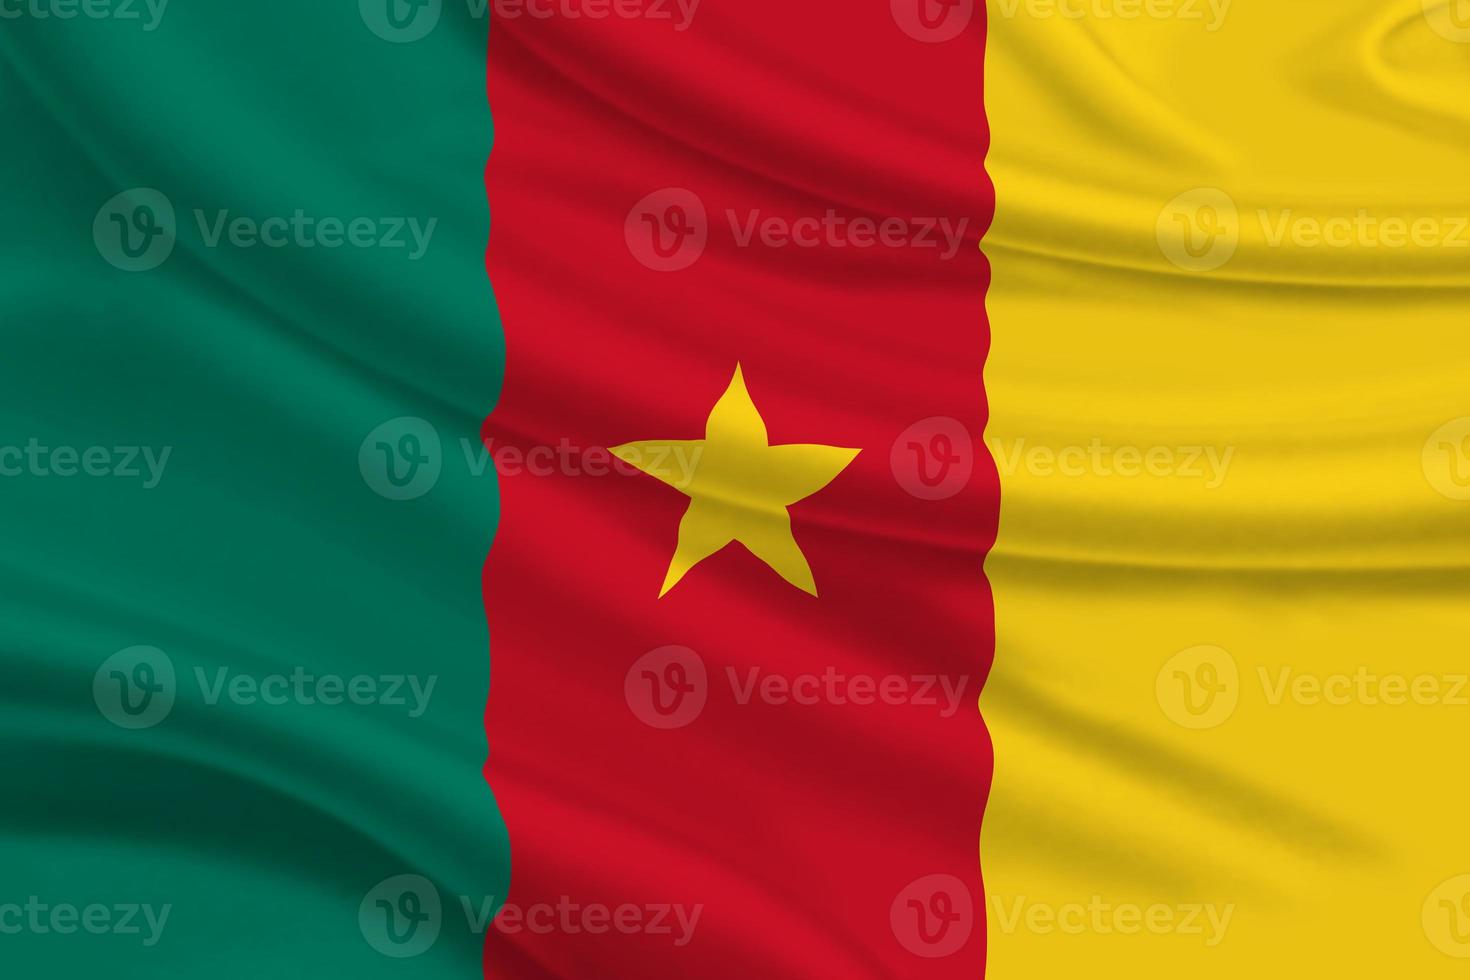 3D Flag of Cameroon on fabric photo